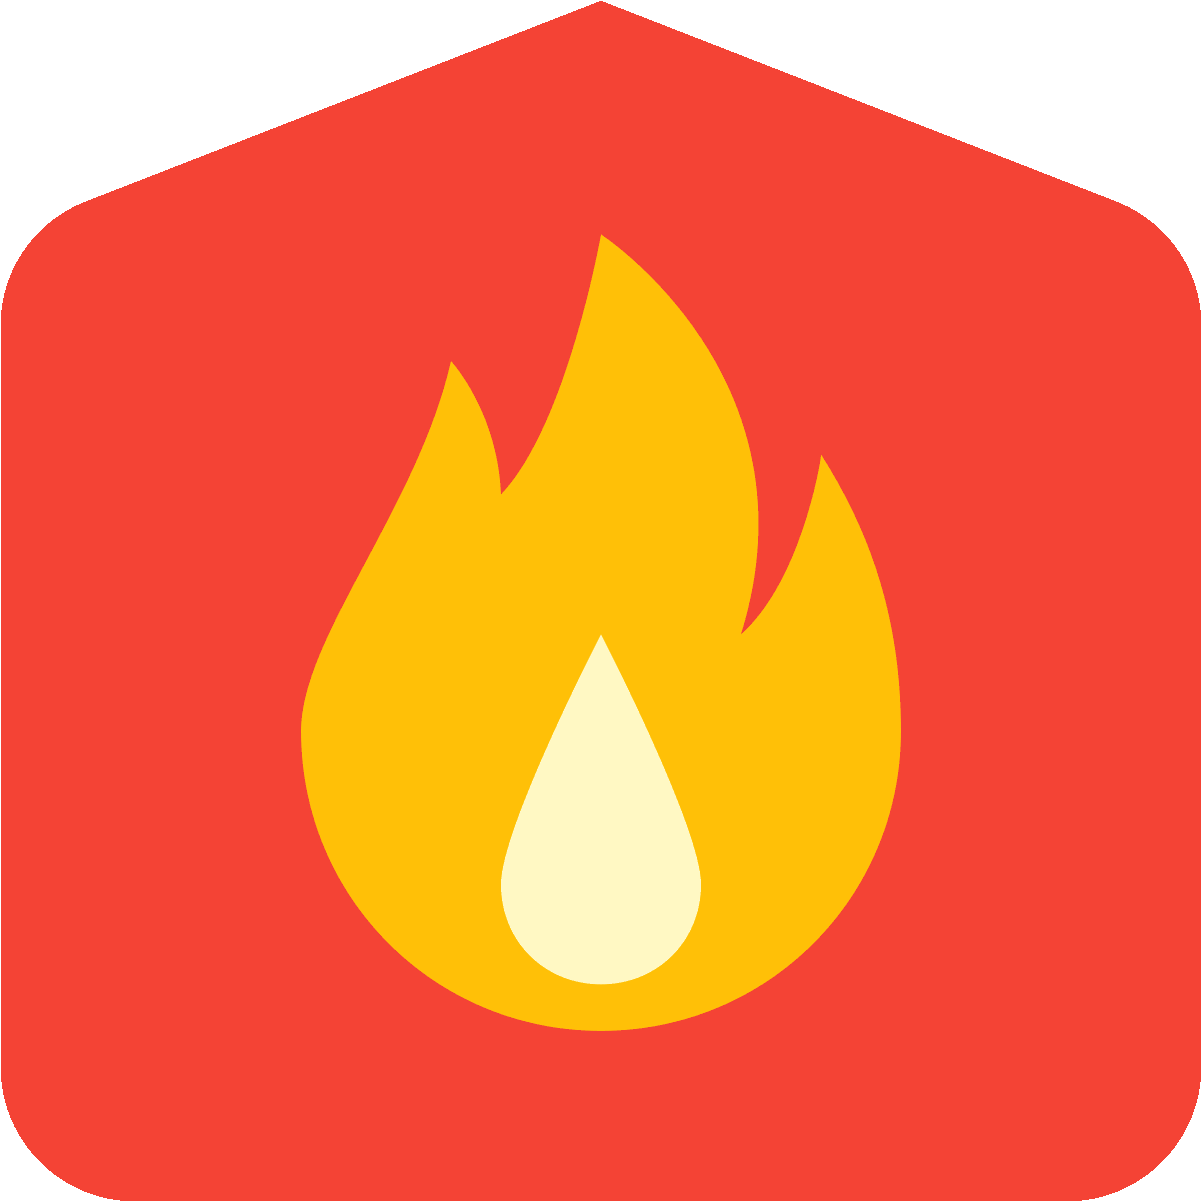 Picture Of A Fire House Icon - Fire Department Icon (1600x1600)